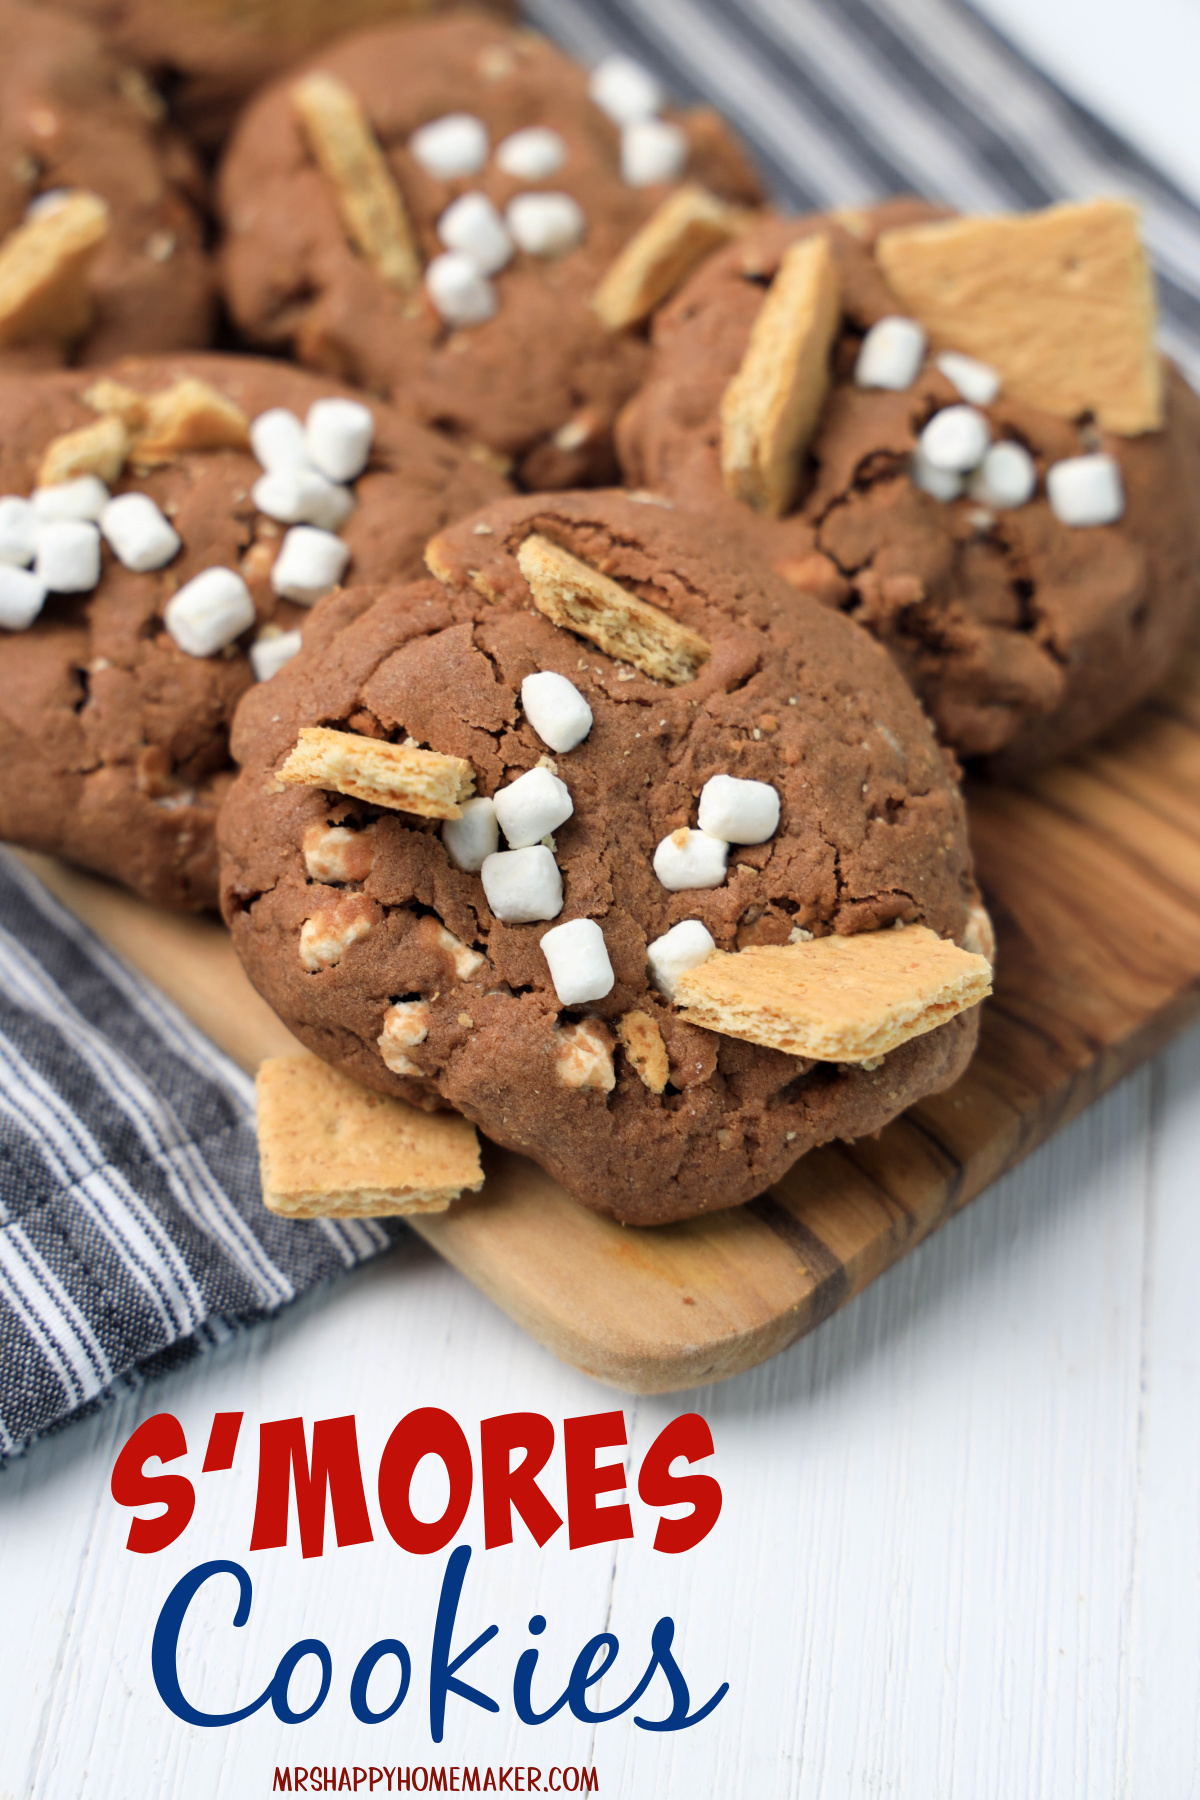 S’mores Cookies on a blue and grey striped towel